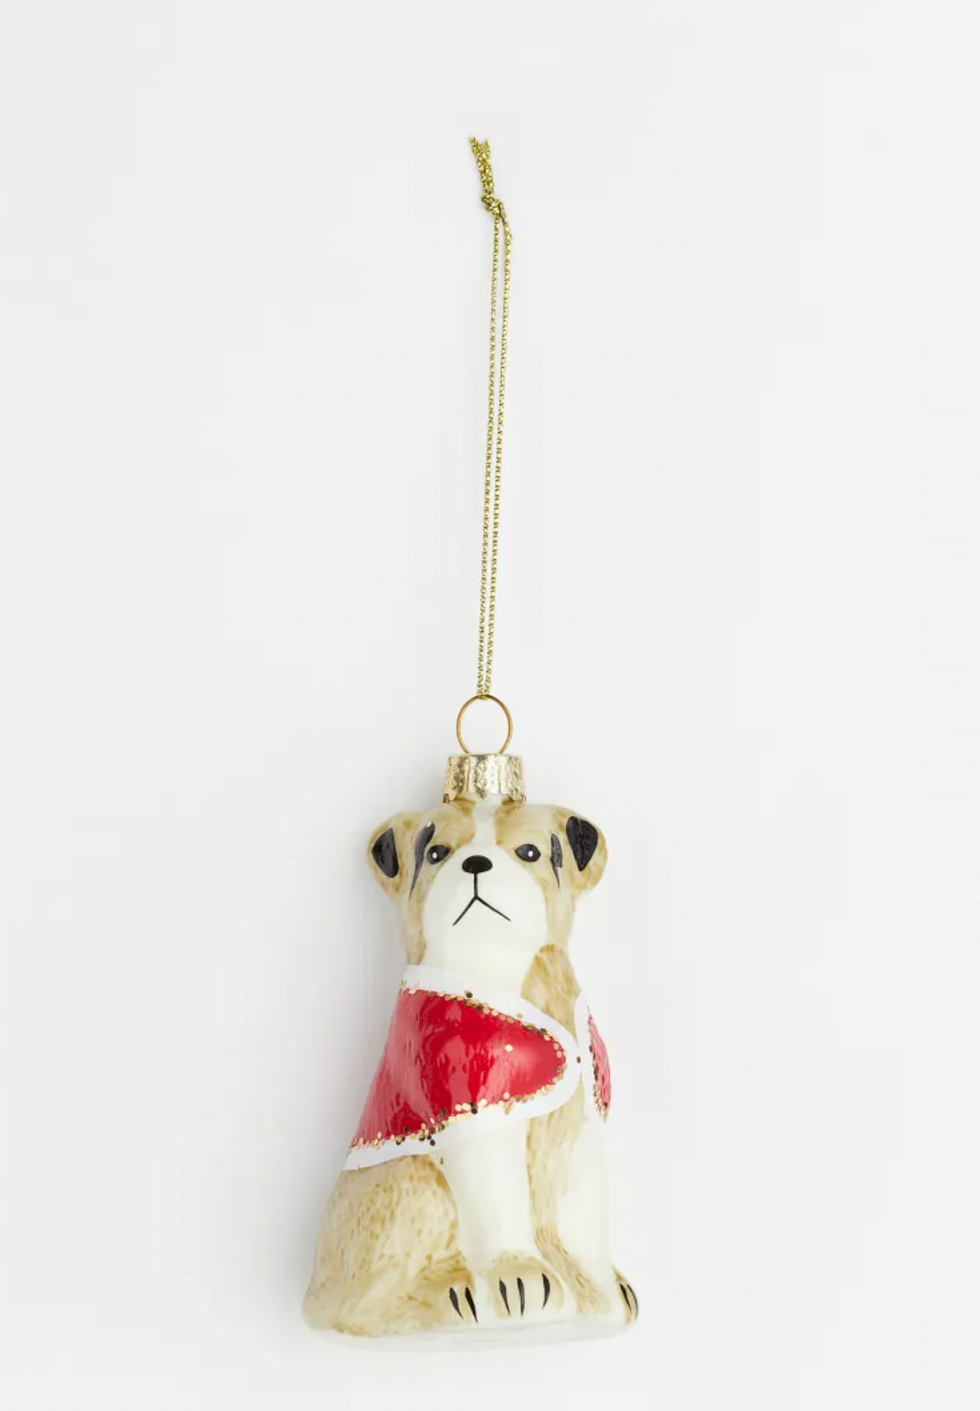 30 Ornaments That Will Have You Rockin’ Around the Xmas Tree - Brit + Co